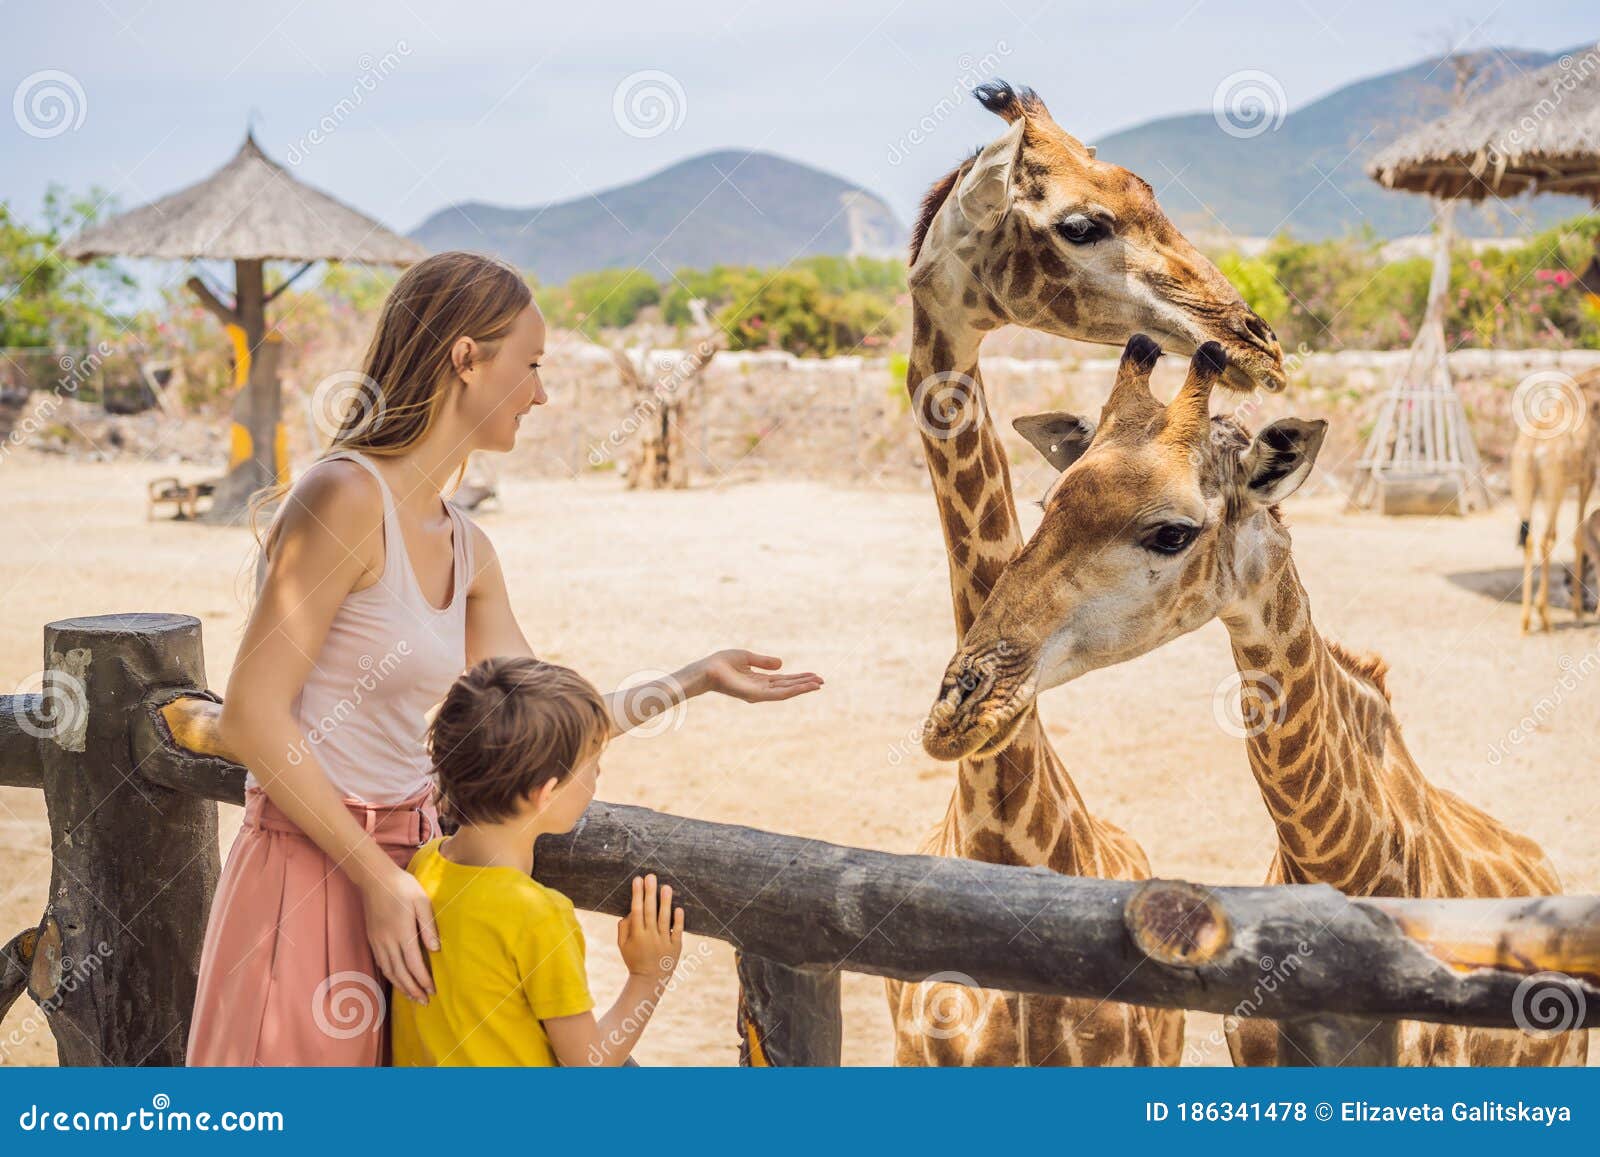 Happy Mother and Son Watching and Feeding Giraffe in Zoo. Happy Family  Having Fun with Animals Safari Park on Warm Stock Photo - Image of baby,  animals: 186341478